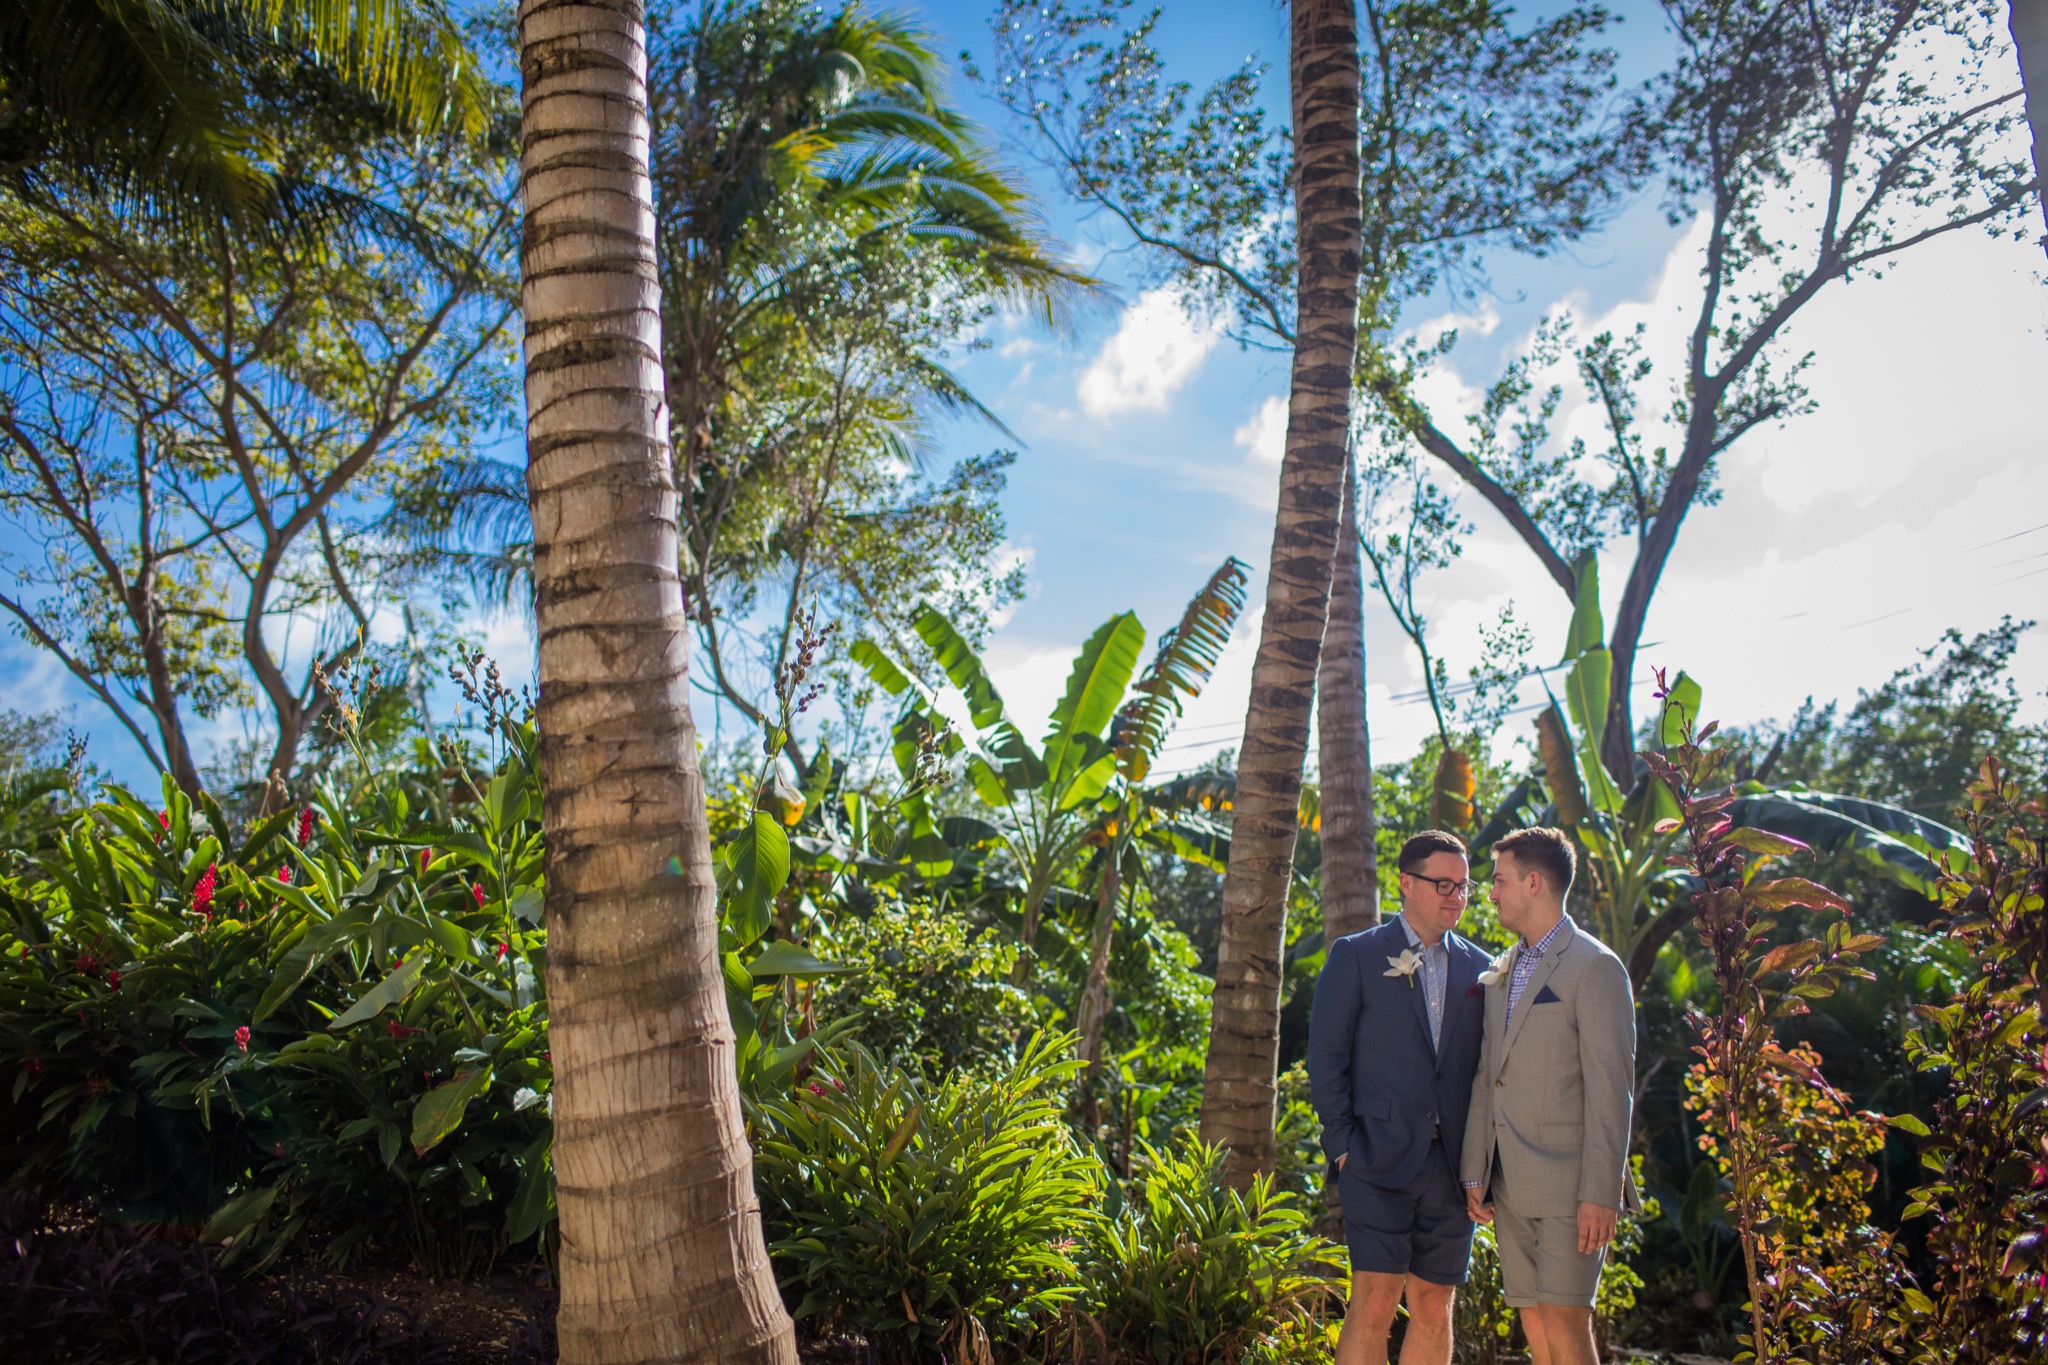 Same Sex Wedding in Playa del Carmen Cancun Paradise Photo Studio Two Grooms Holding Hands